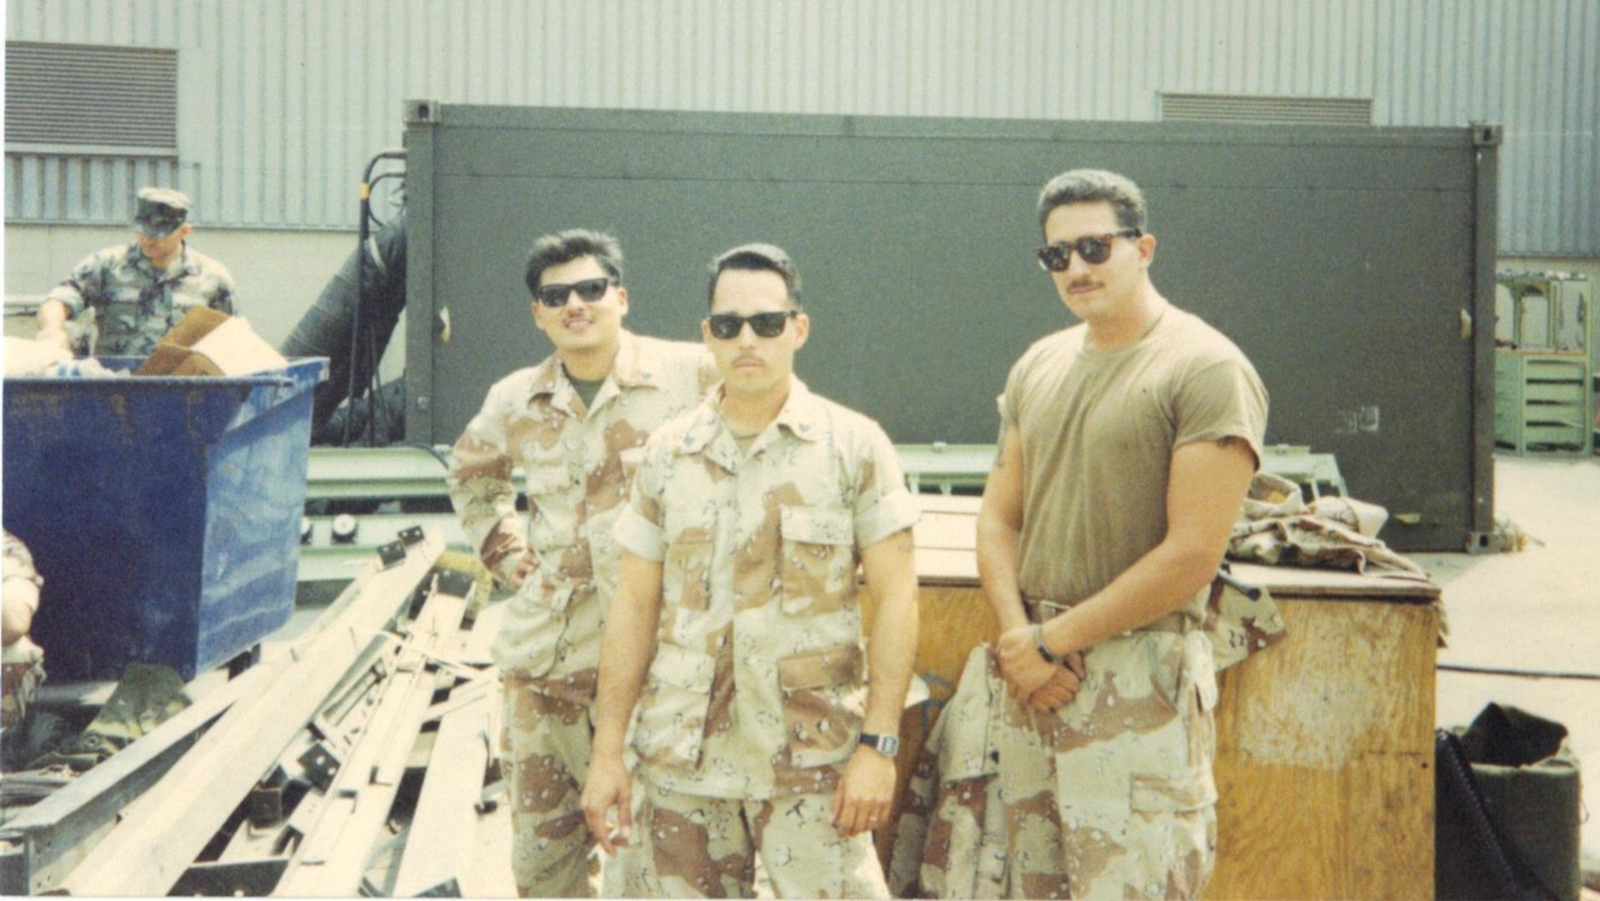 Mario Sanchez and two other members of the Marine Corps pose in front of military equipment.